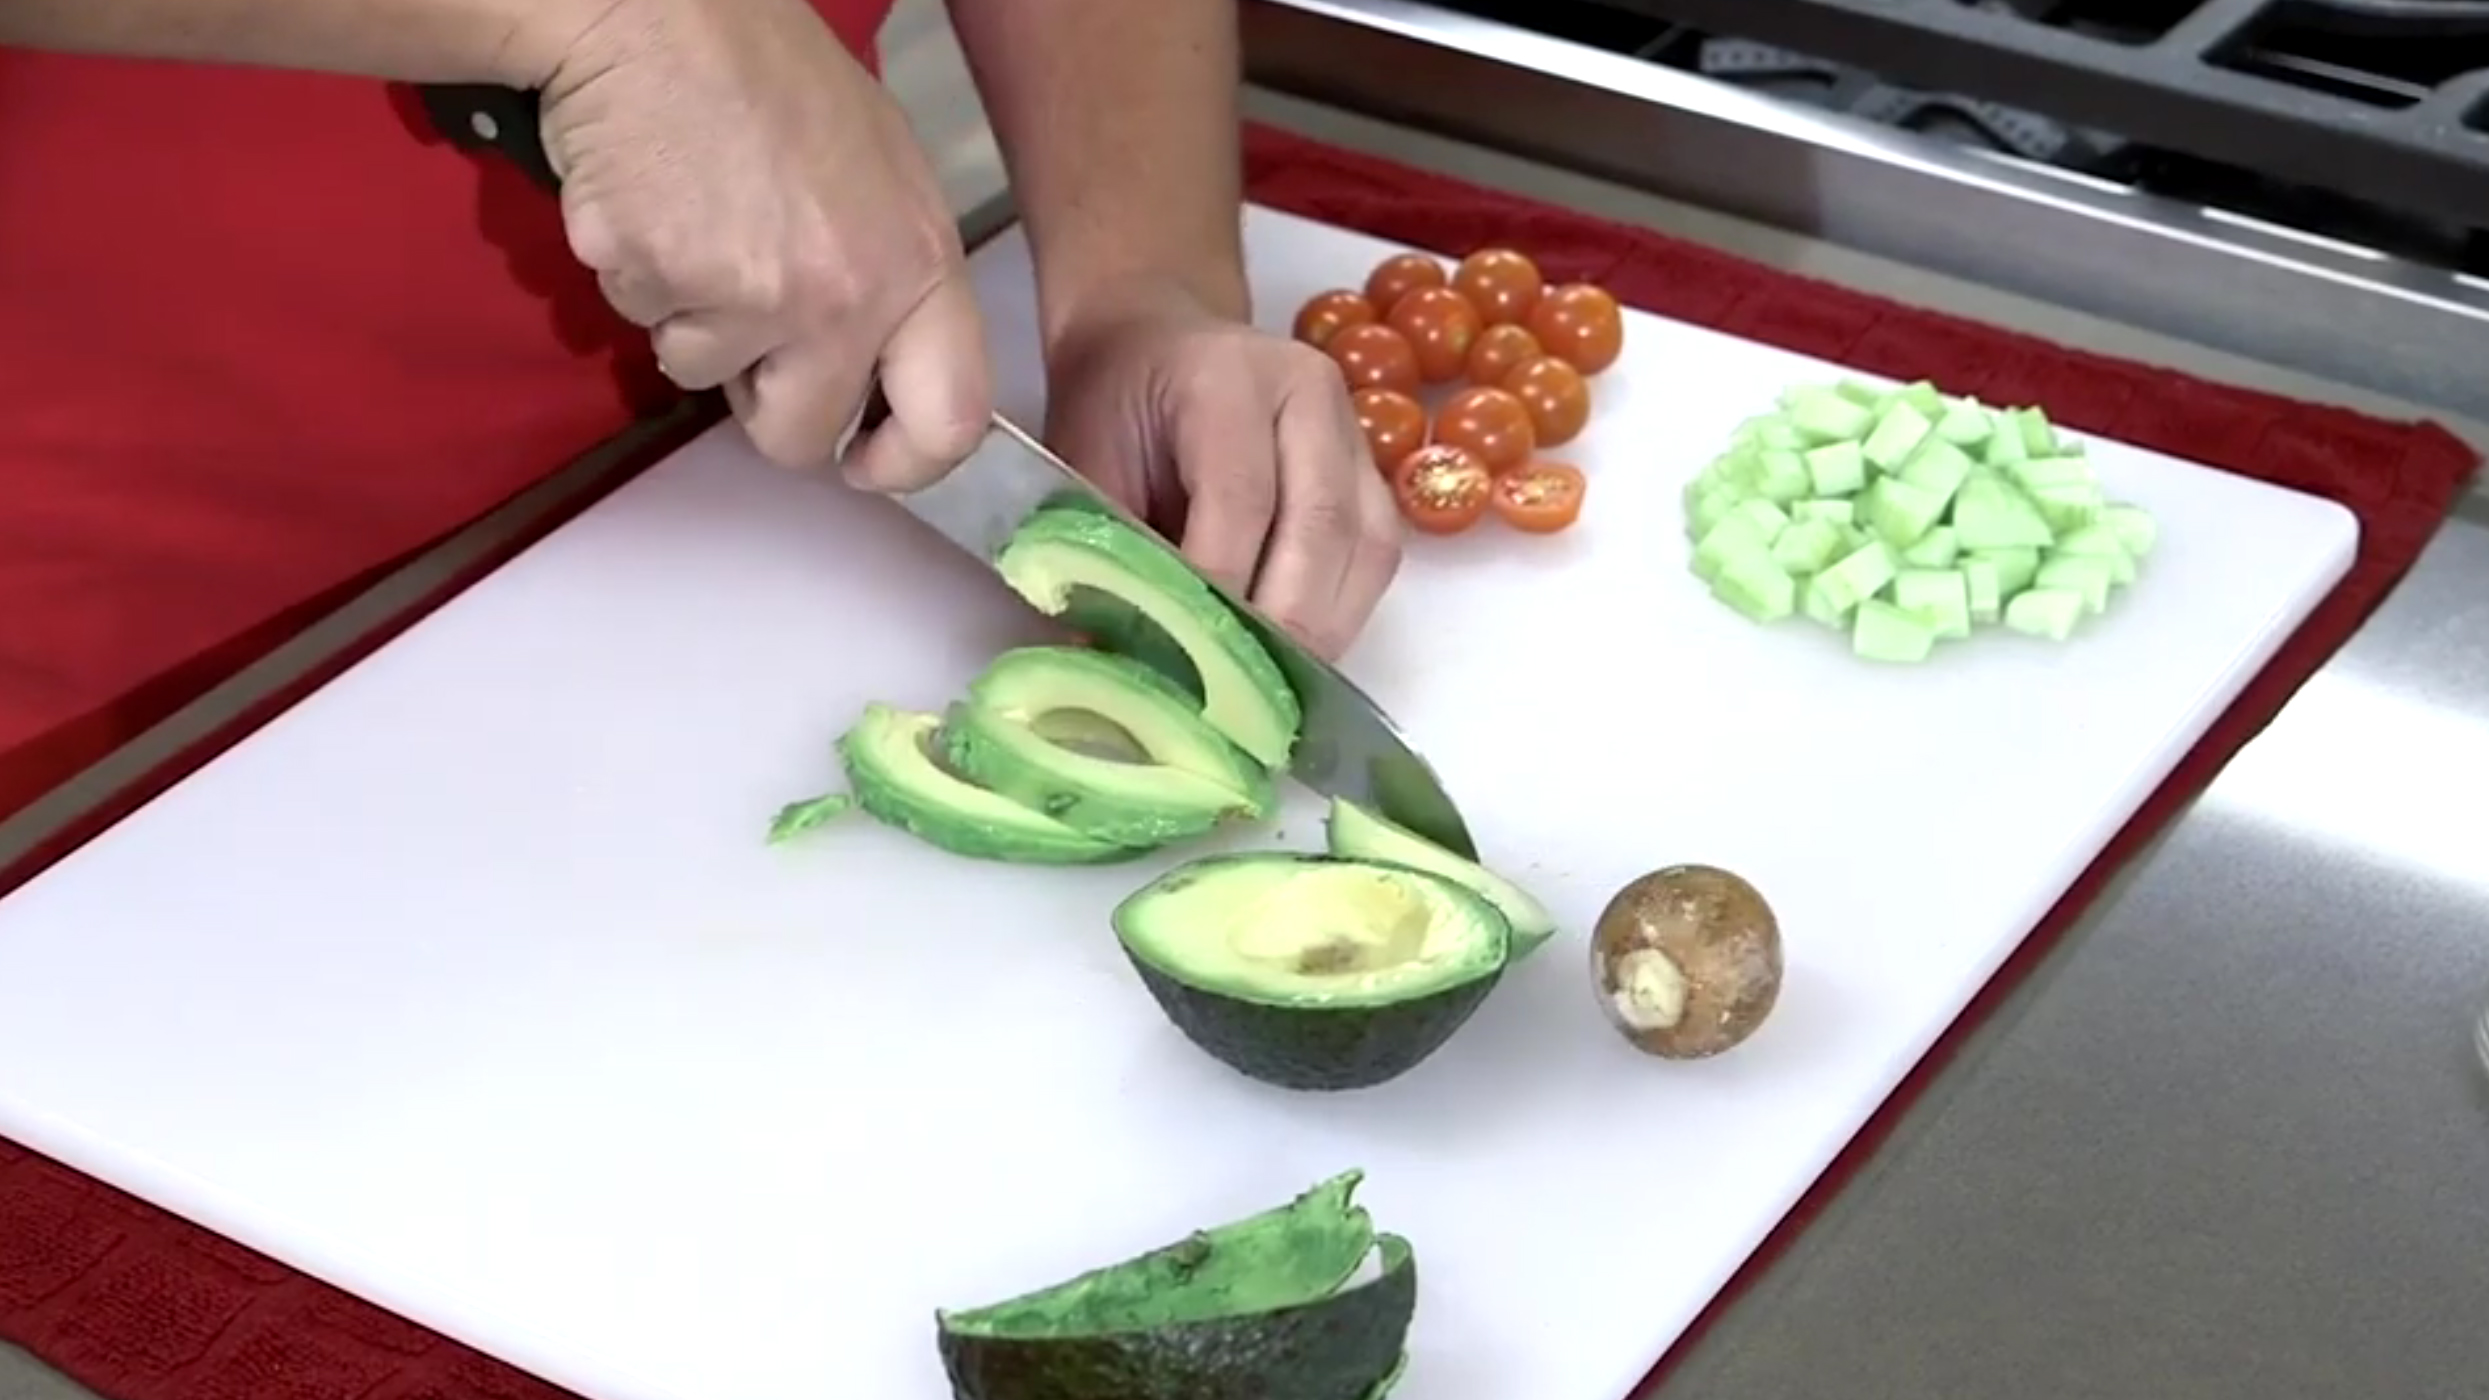 Hand with a knife slicing an avocado on a cutting board alongside diced cucumbers and cherry tomatoes.